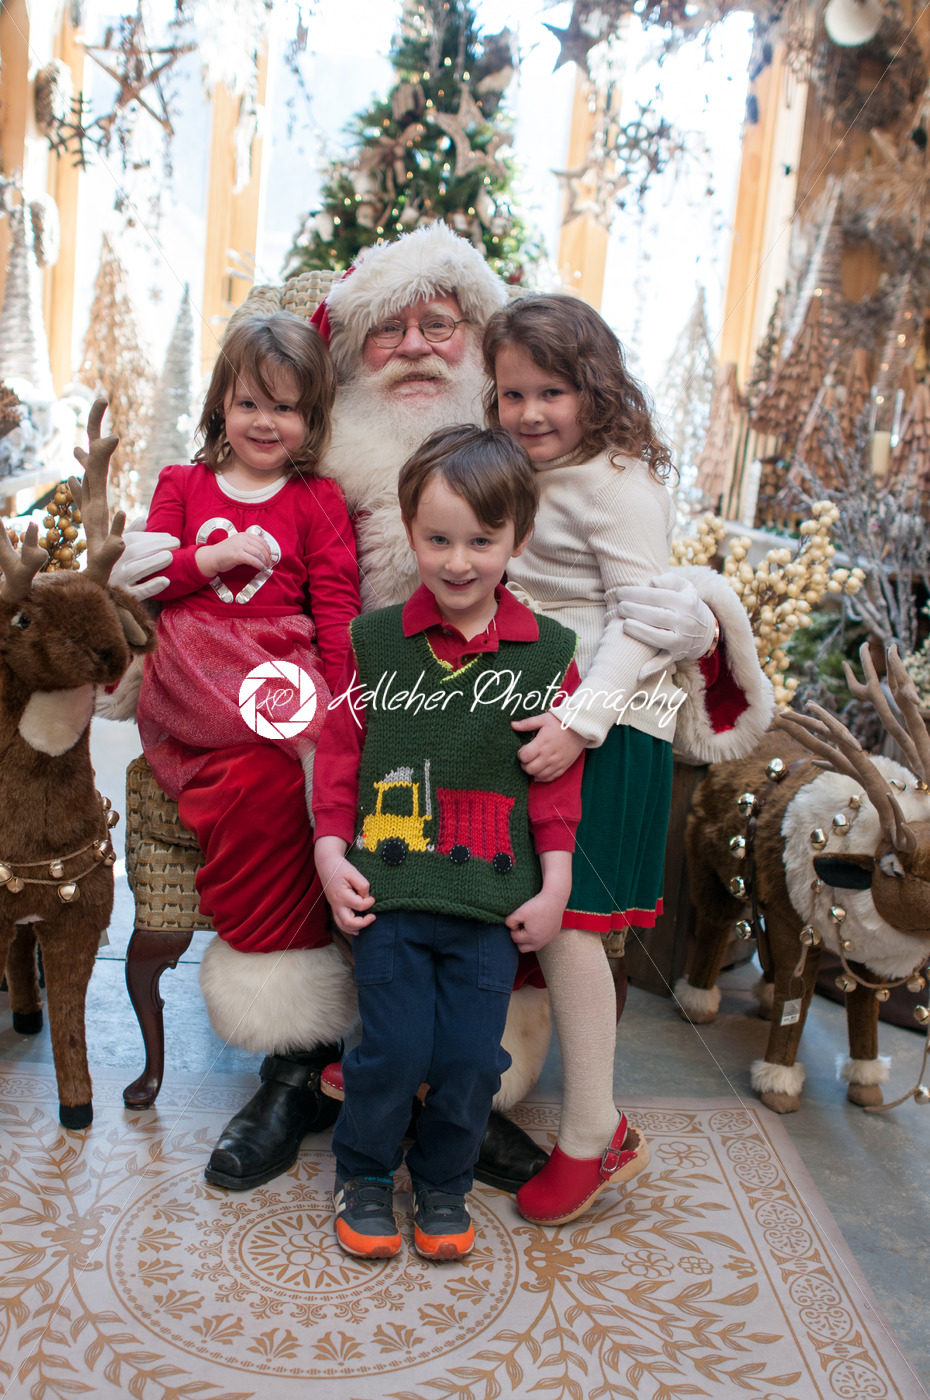 3 Siblings, 2 girls and 1 boy sitting on Santa with decorated tree in background - Kelleher Photography Store